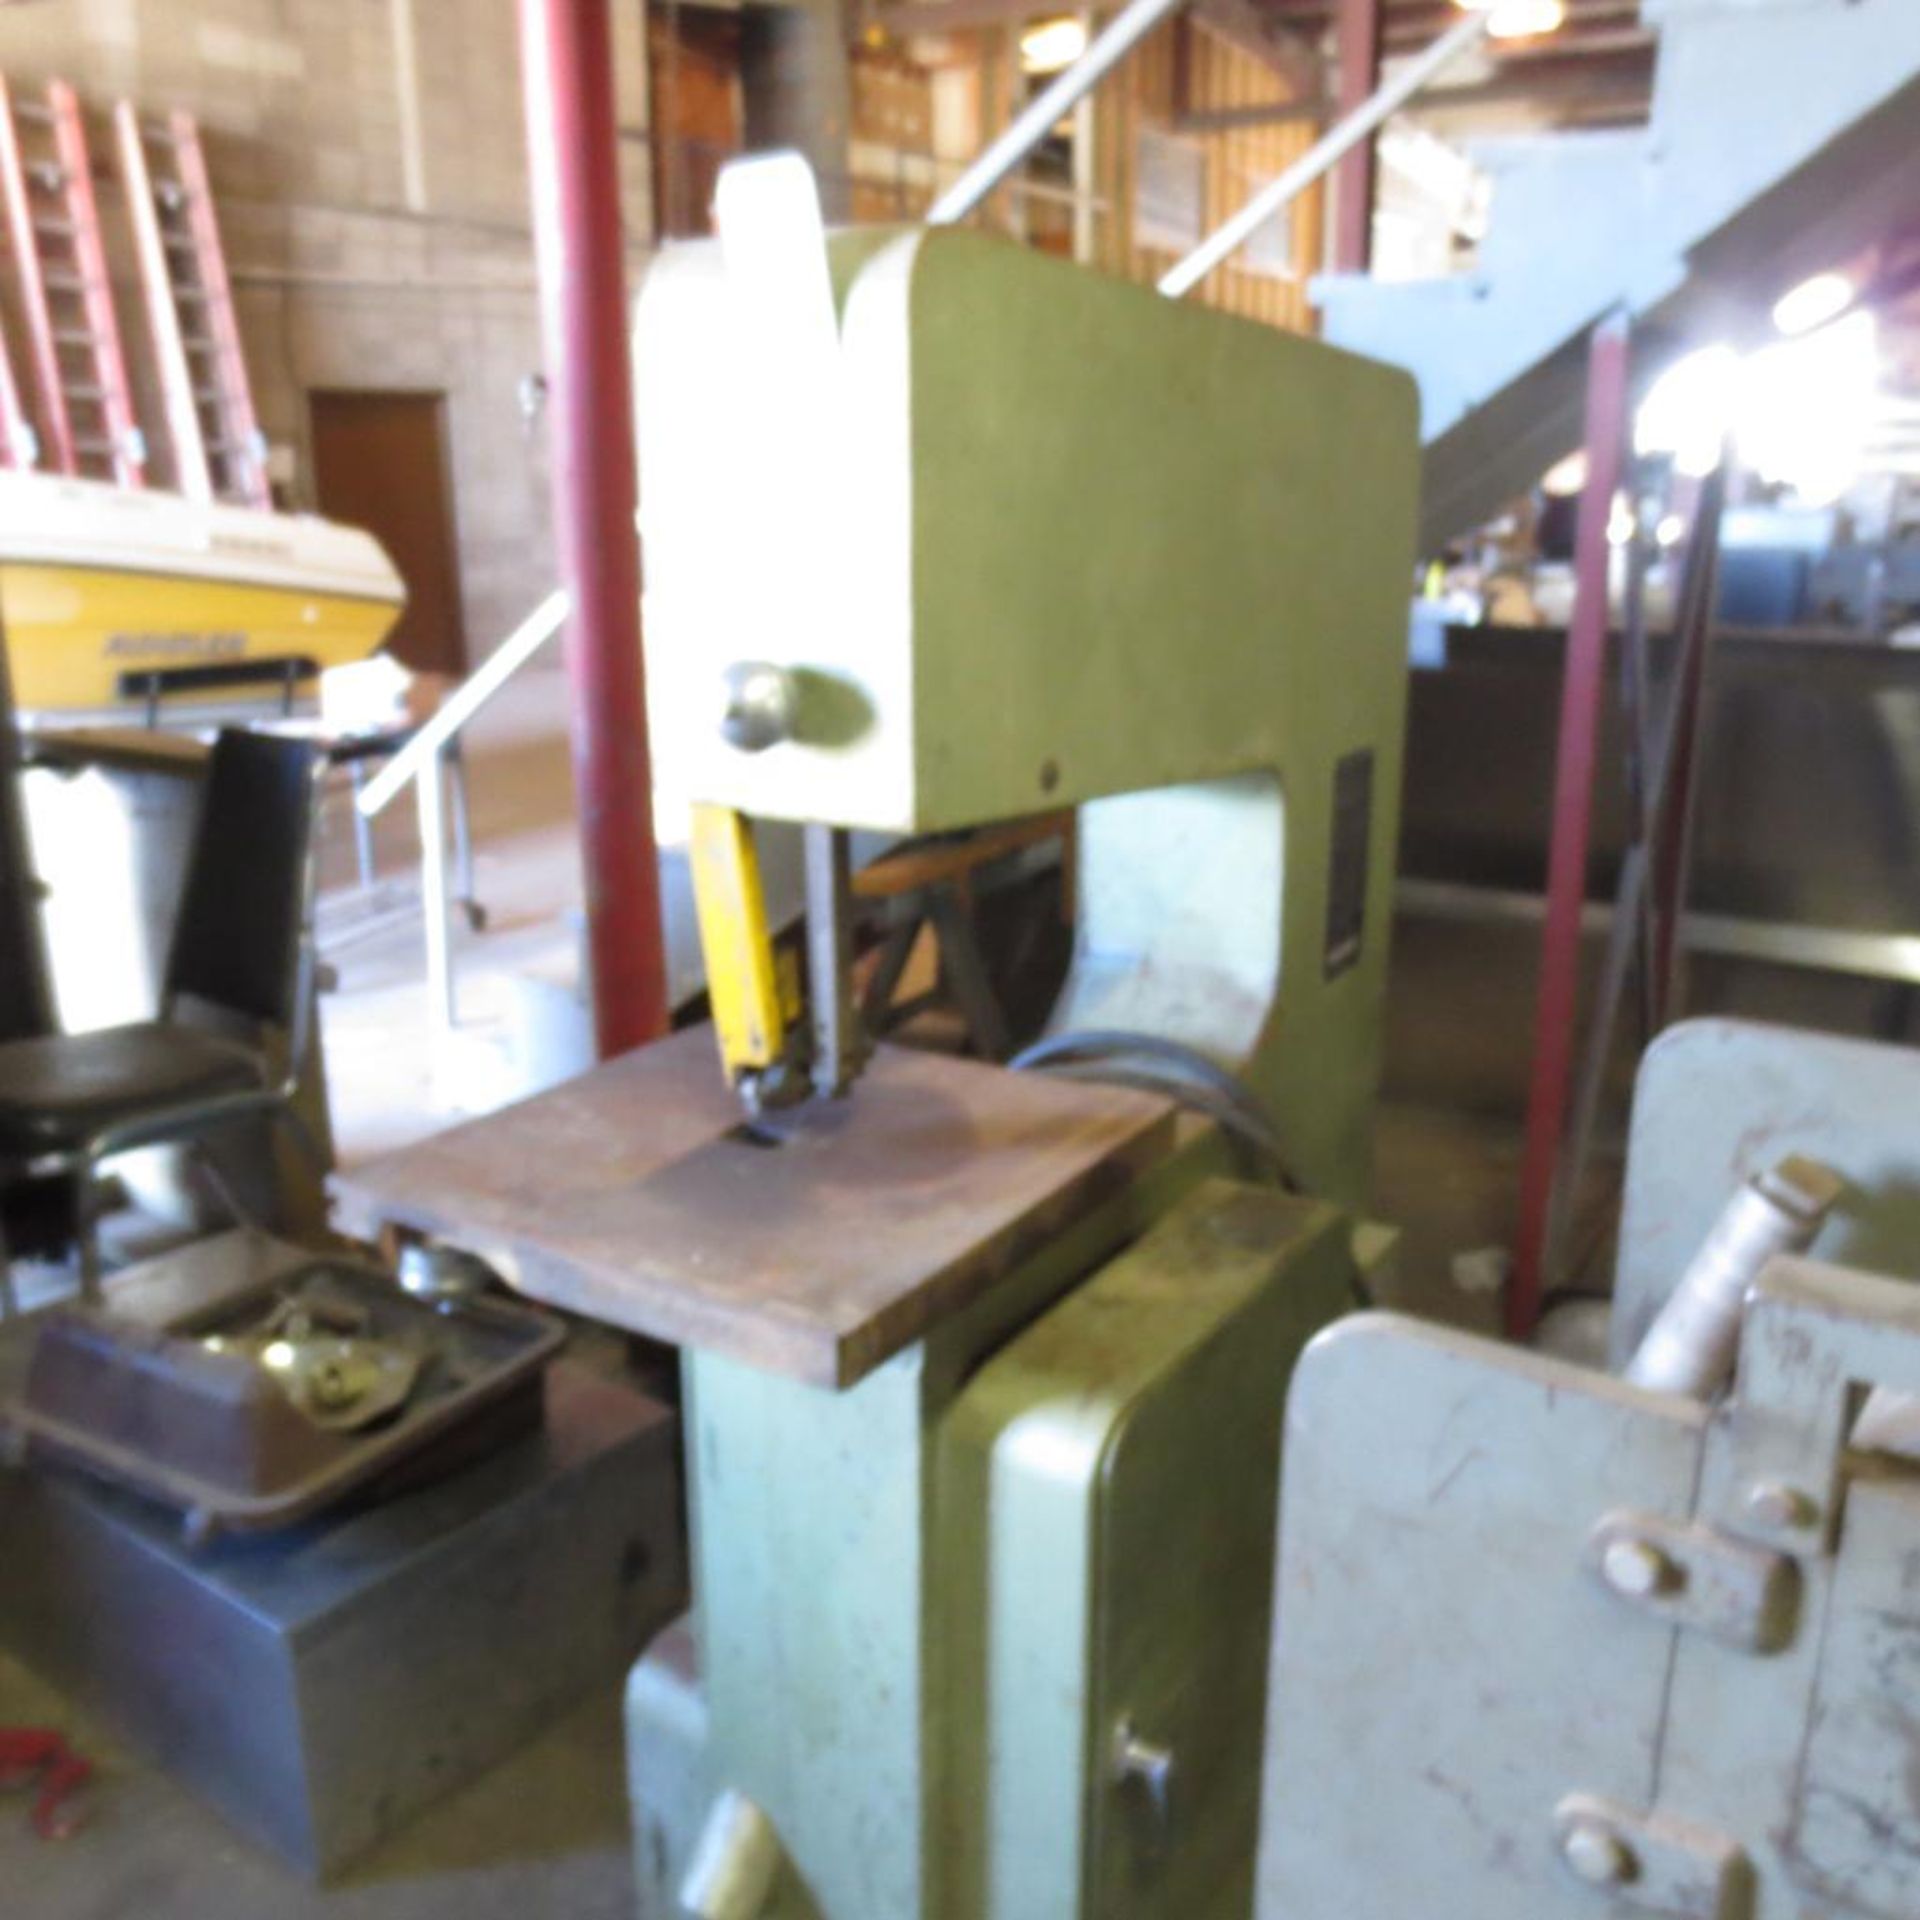 Starite 24-T-10 Band Saw, 19" X 19" Table, 24" Throat, 220 V, 3 PH, S/N 98997 - Image 2 of 4